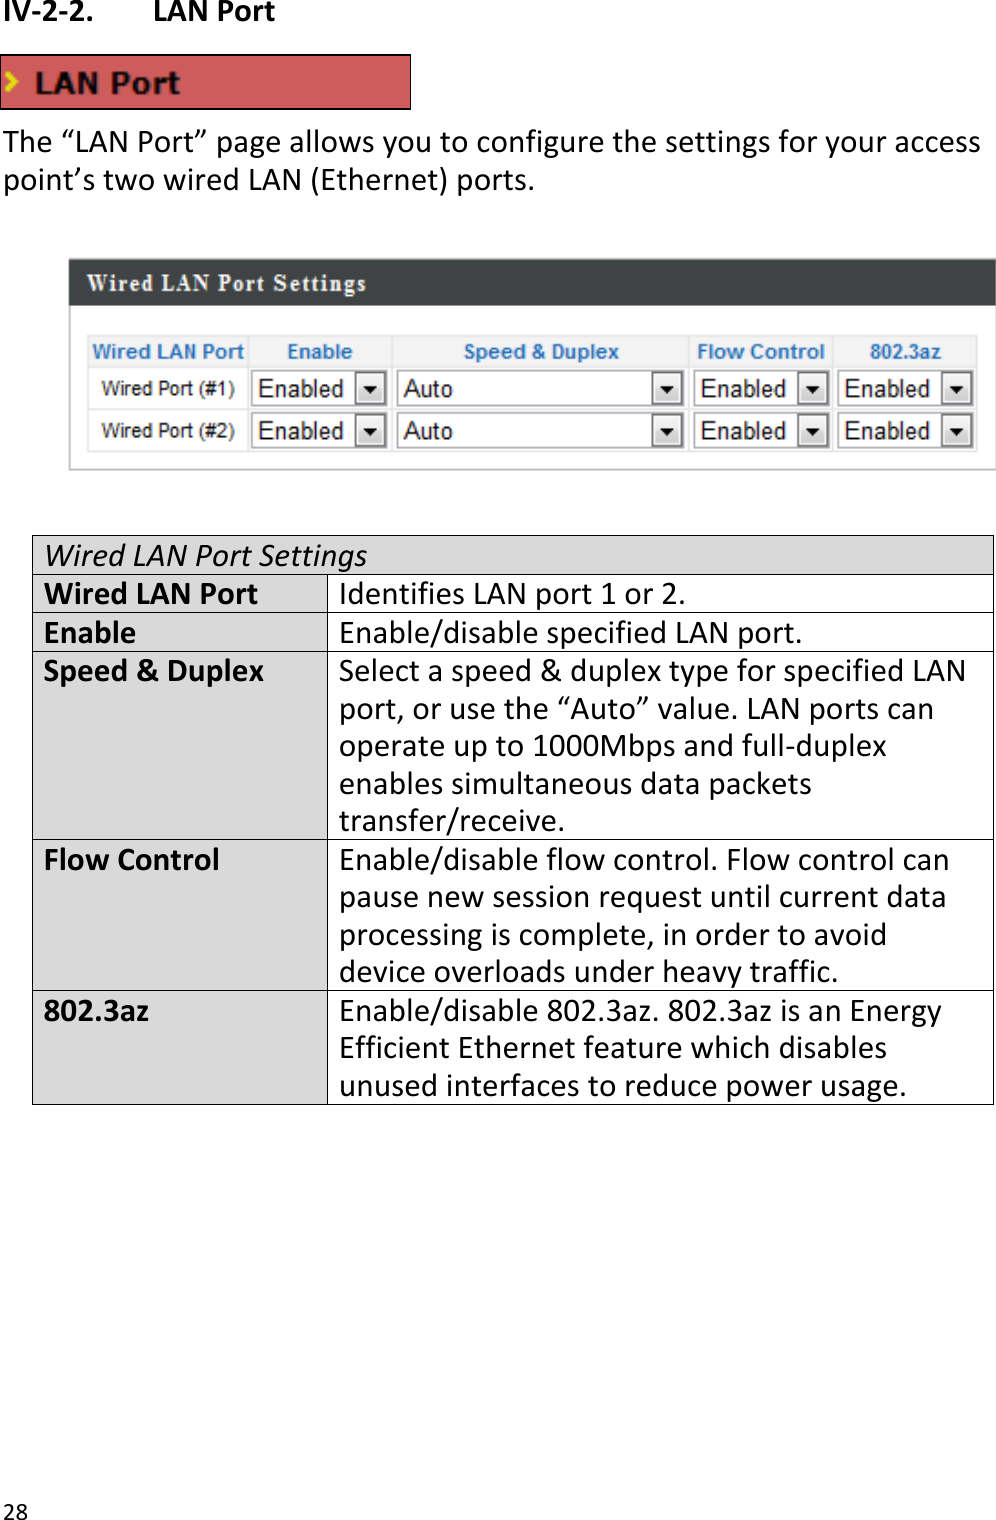 28  IV-2-2.   LAN Port   The “LAN Port” page allows you to configure the settings for your access point’s two wired LAN (Ethernet) ports.    Wired LAN Port Settings Wired LAN Port Identifies LAN port 1 or 2. Enable Enable/disable specified LAN port. Speed &amp; Duplex Select a speed &amp; duplex type for specified LAN port, or use the “Auto” value. LAN ports can operate up to 1000Mbps and full-duplex enables simultaneous data packets transfer/receive. Flow Control Enable/disable flow control. Flow control can pause new session request until current data processing is complete, in order to avoid device overloads under heavy traffic. 802.3az Enable/disable 802.3az. 802.3az is an Energy Efficient Ethernet feature which disables unused interfaces to reduce power usage.    